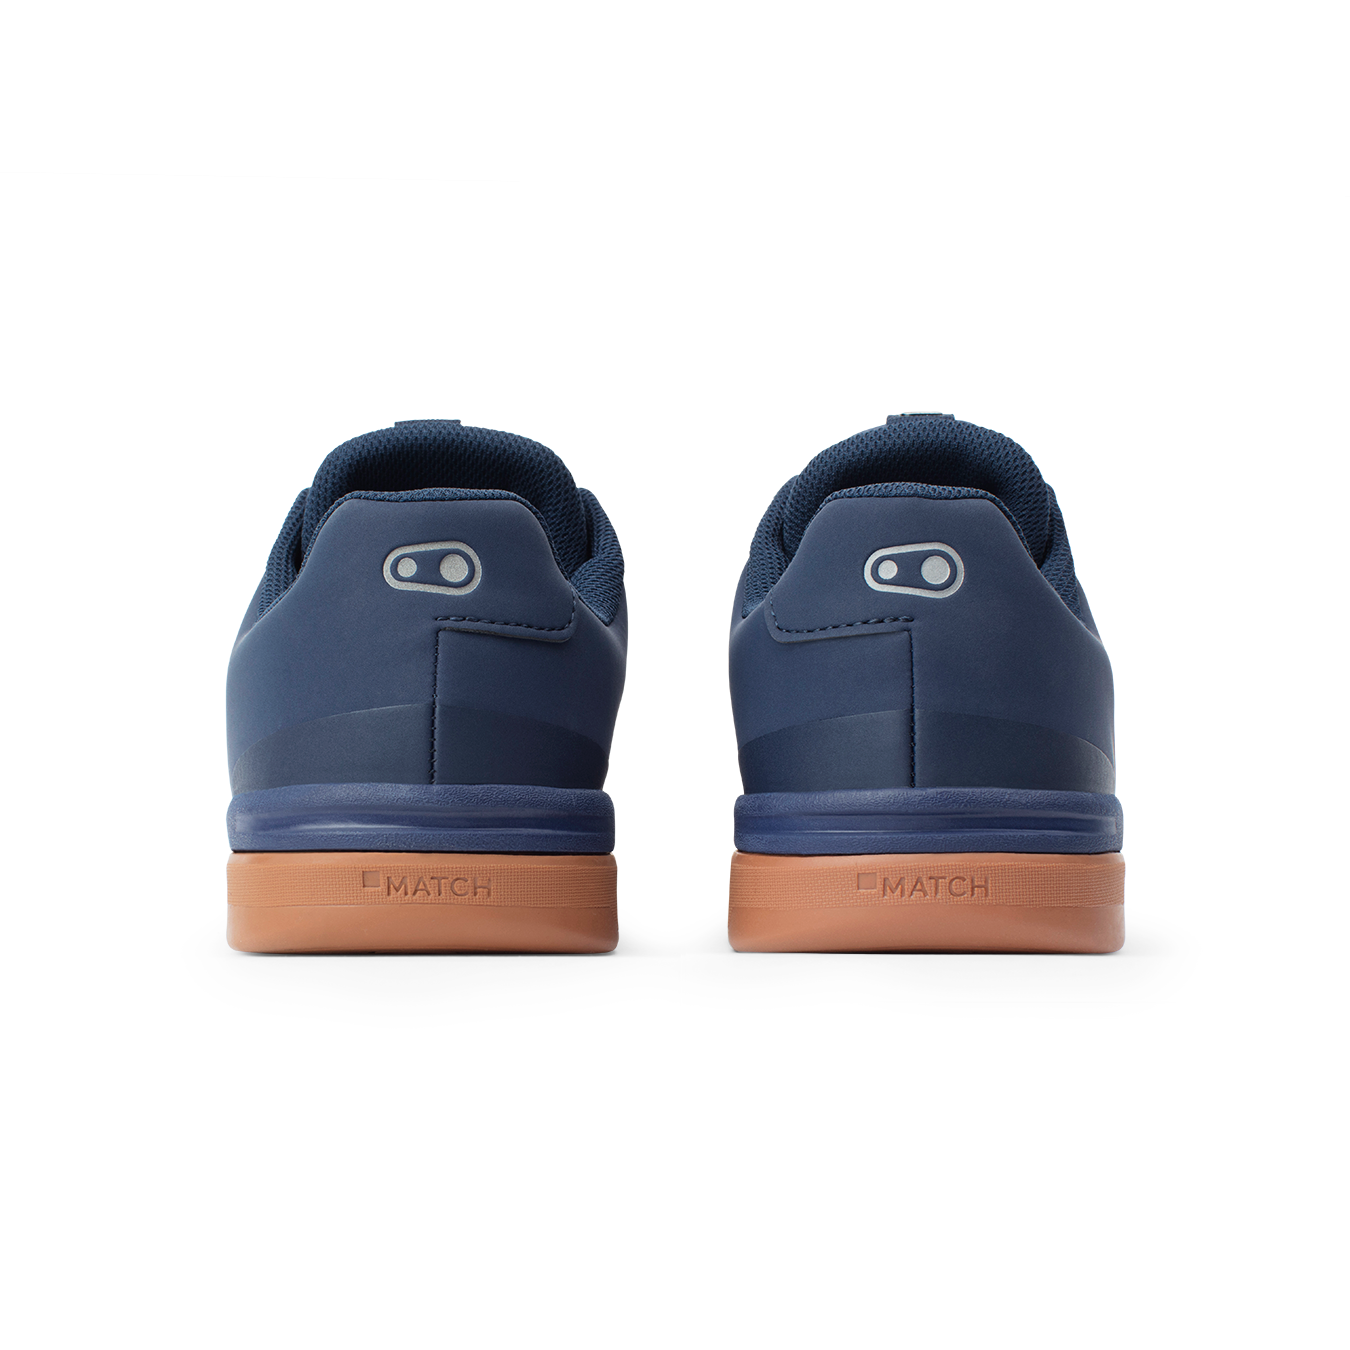 Crank Brothers Stamp Lace Flat Shoes - US 10.5 - Navy - Gum